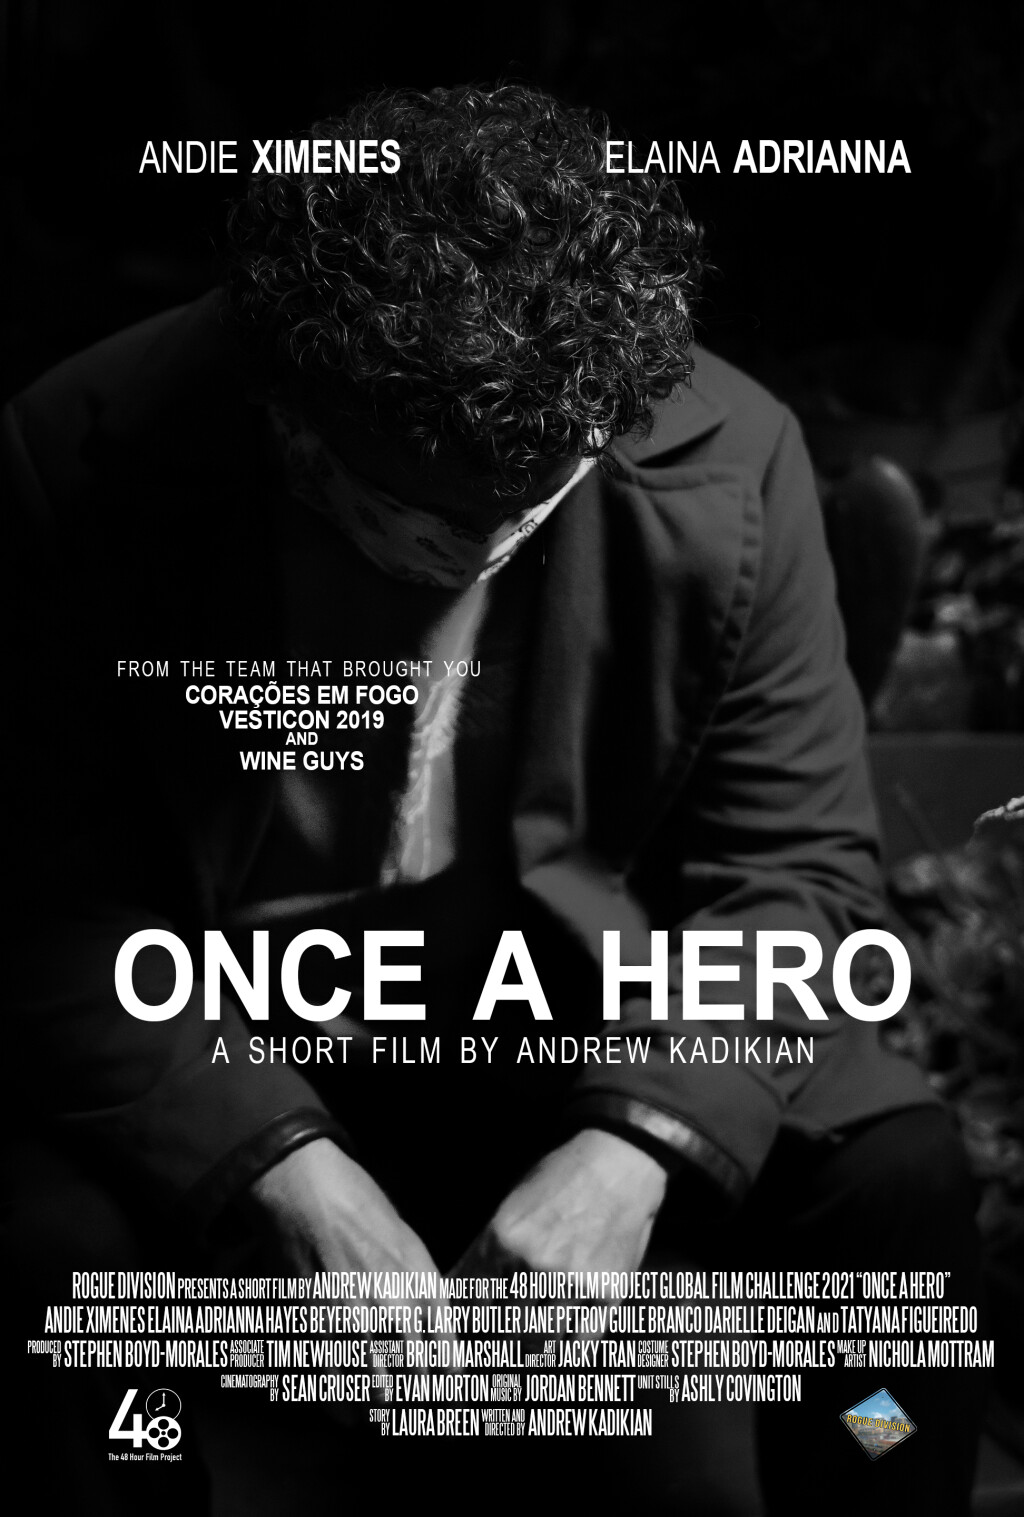 Filmposter for Once a Hero